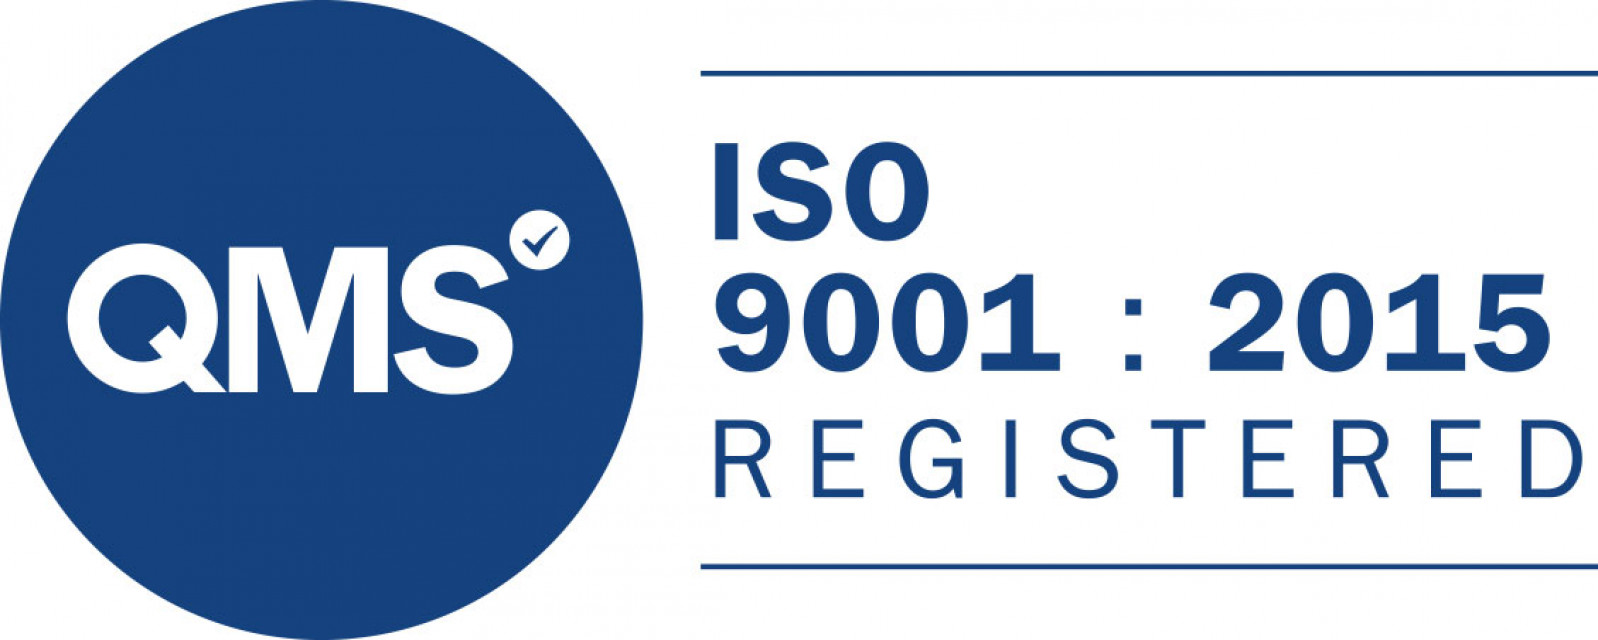 Direct Air secures ISO 9001 renewal